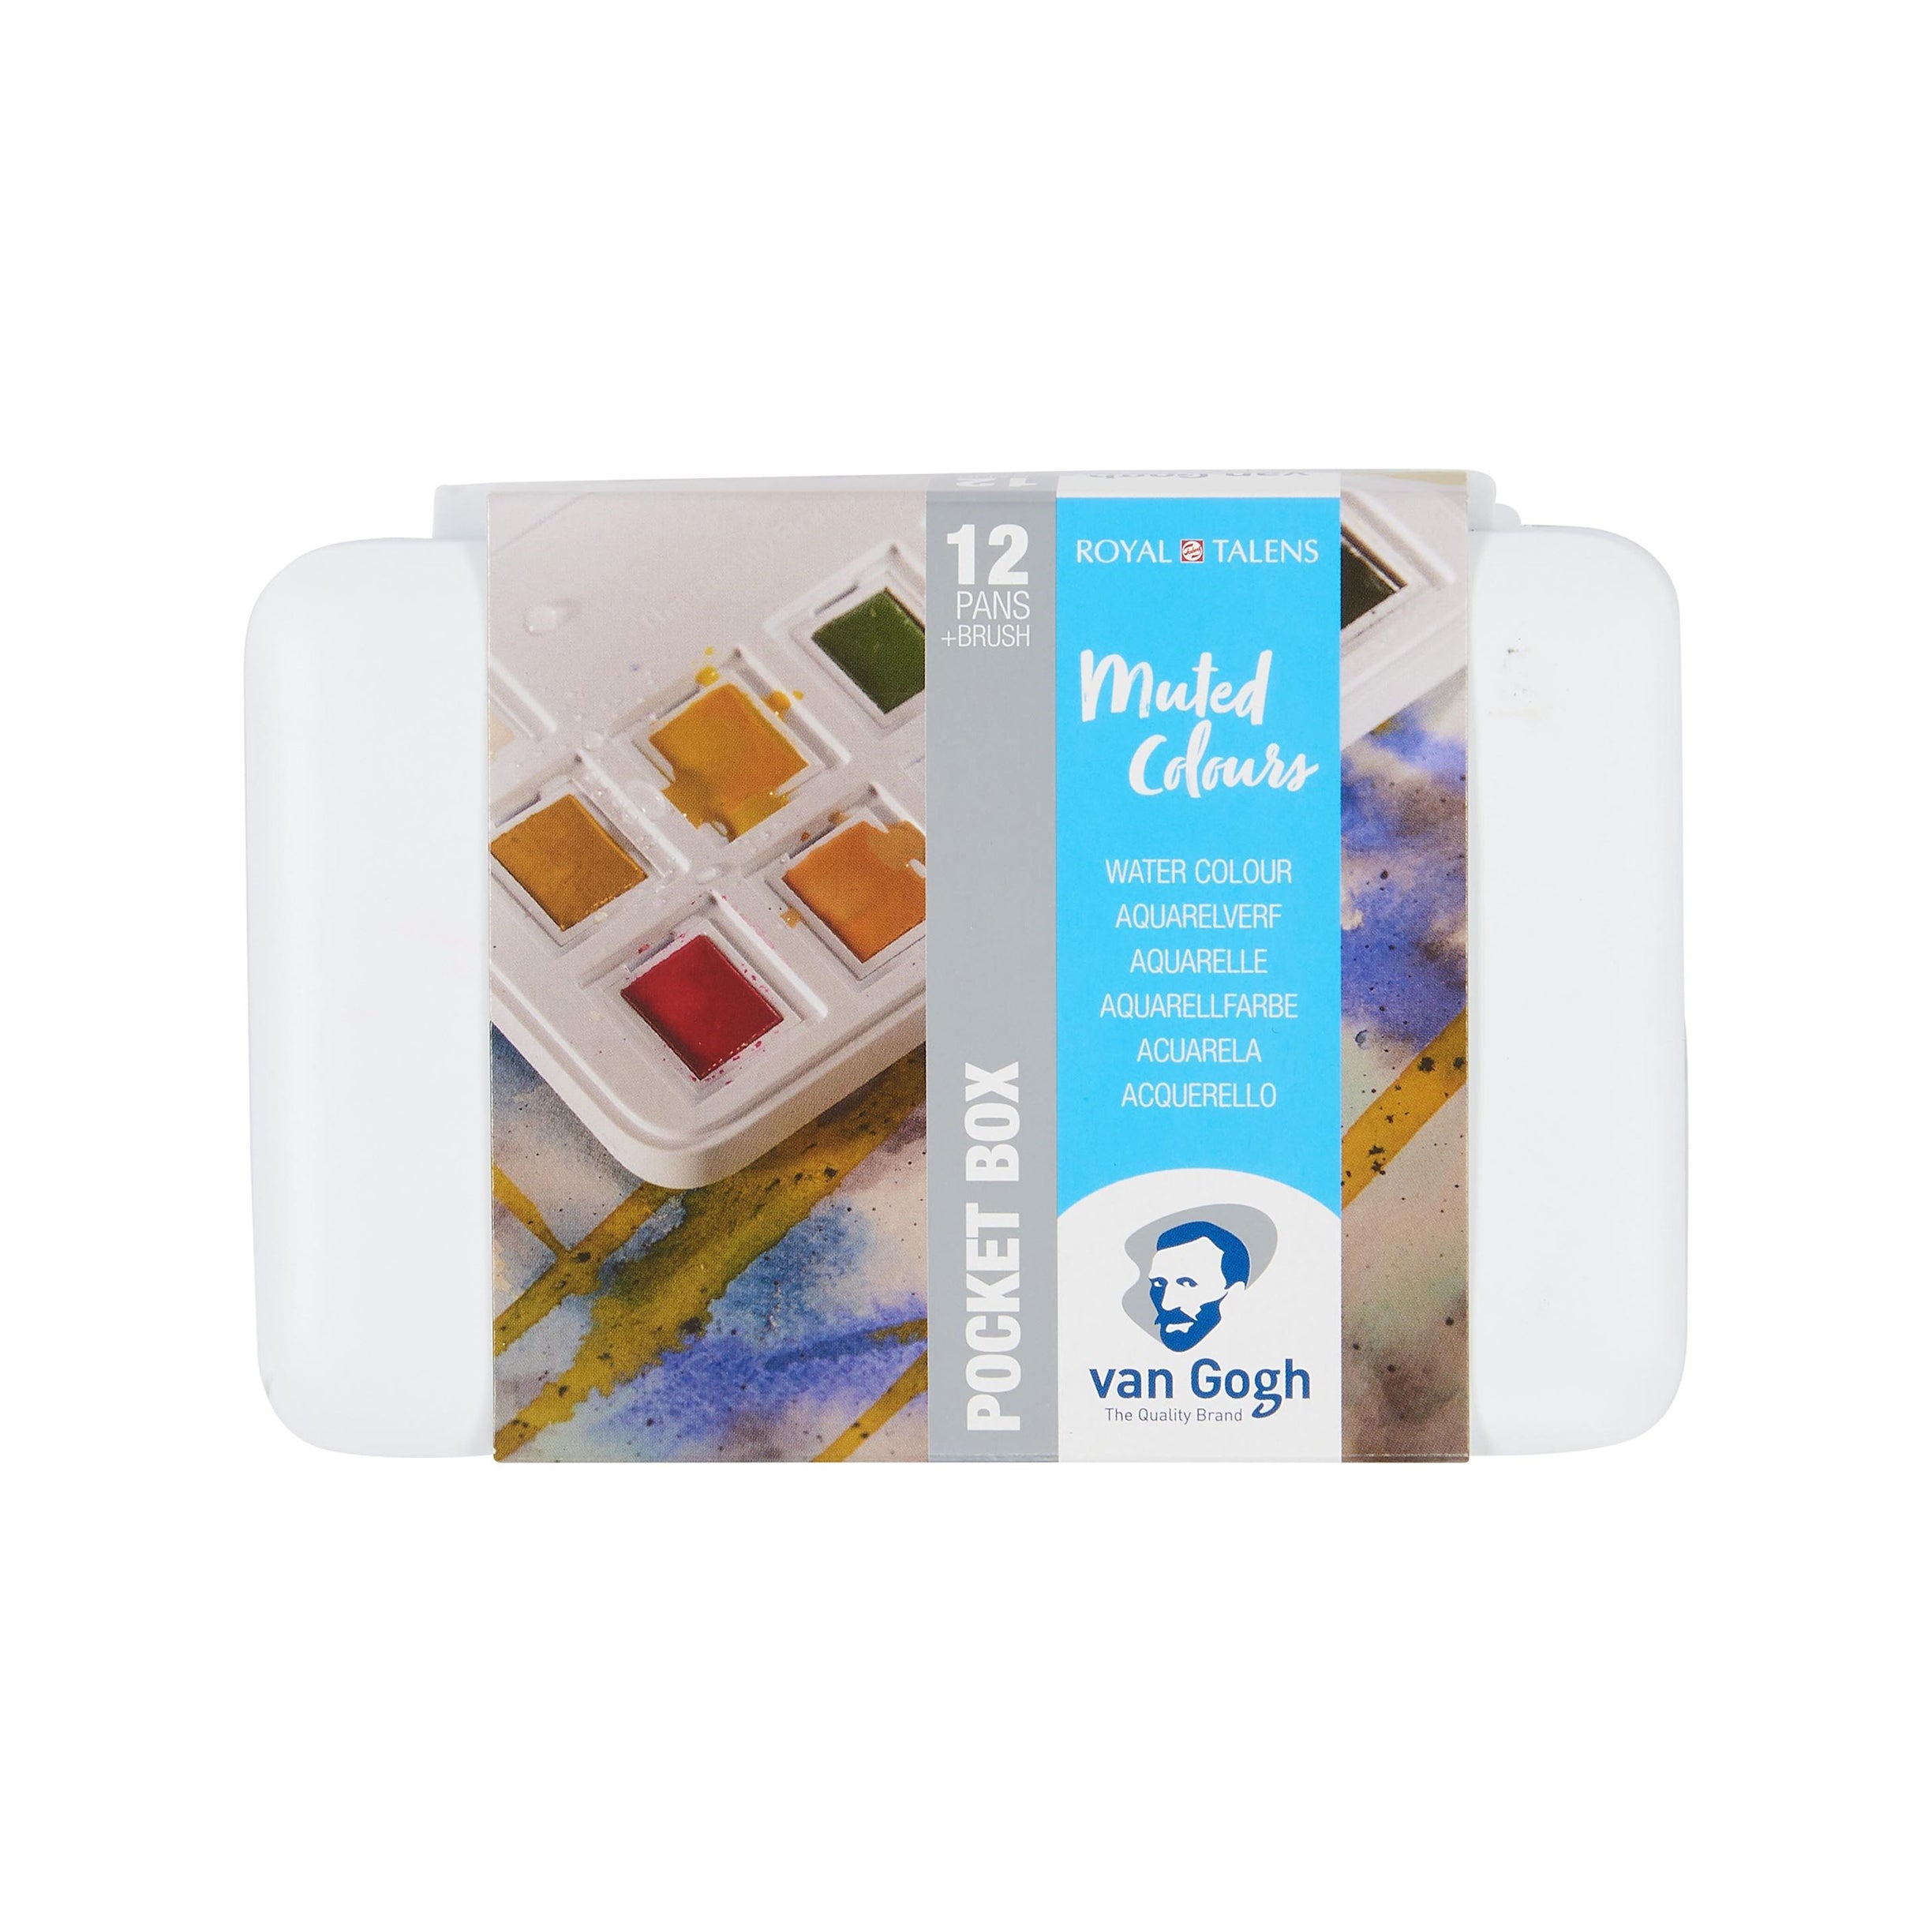 Handmade Watercolor kit -RAFTER kit includes 6 half pans -tin and water  brush - Free Shipping in US